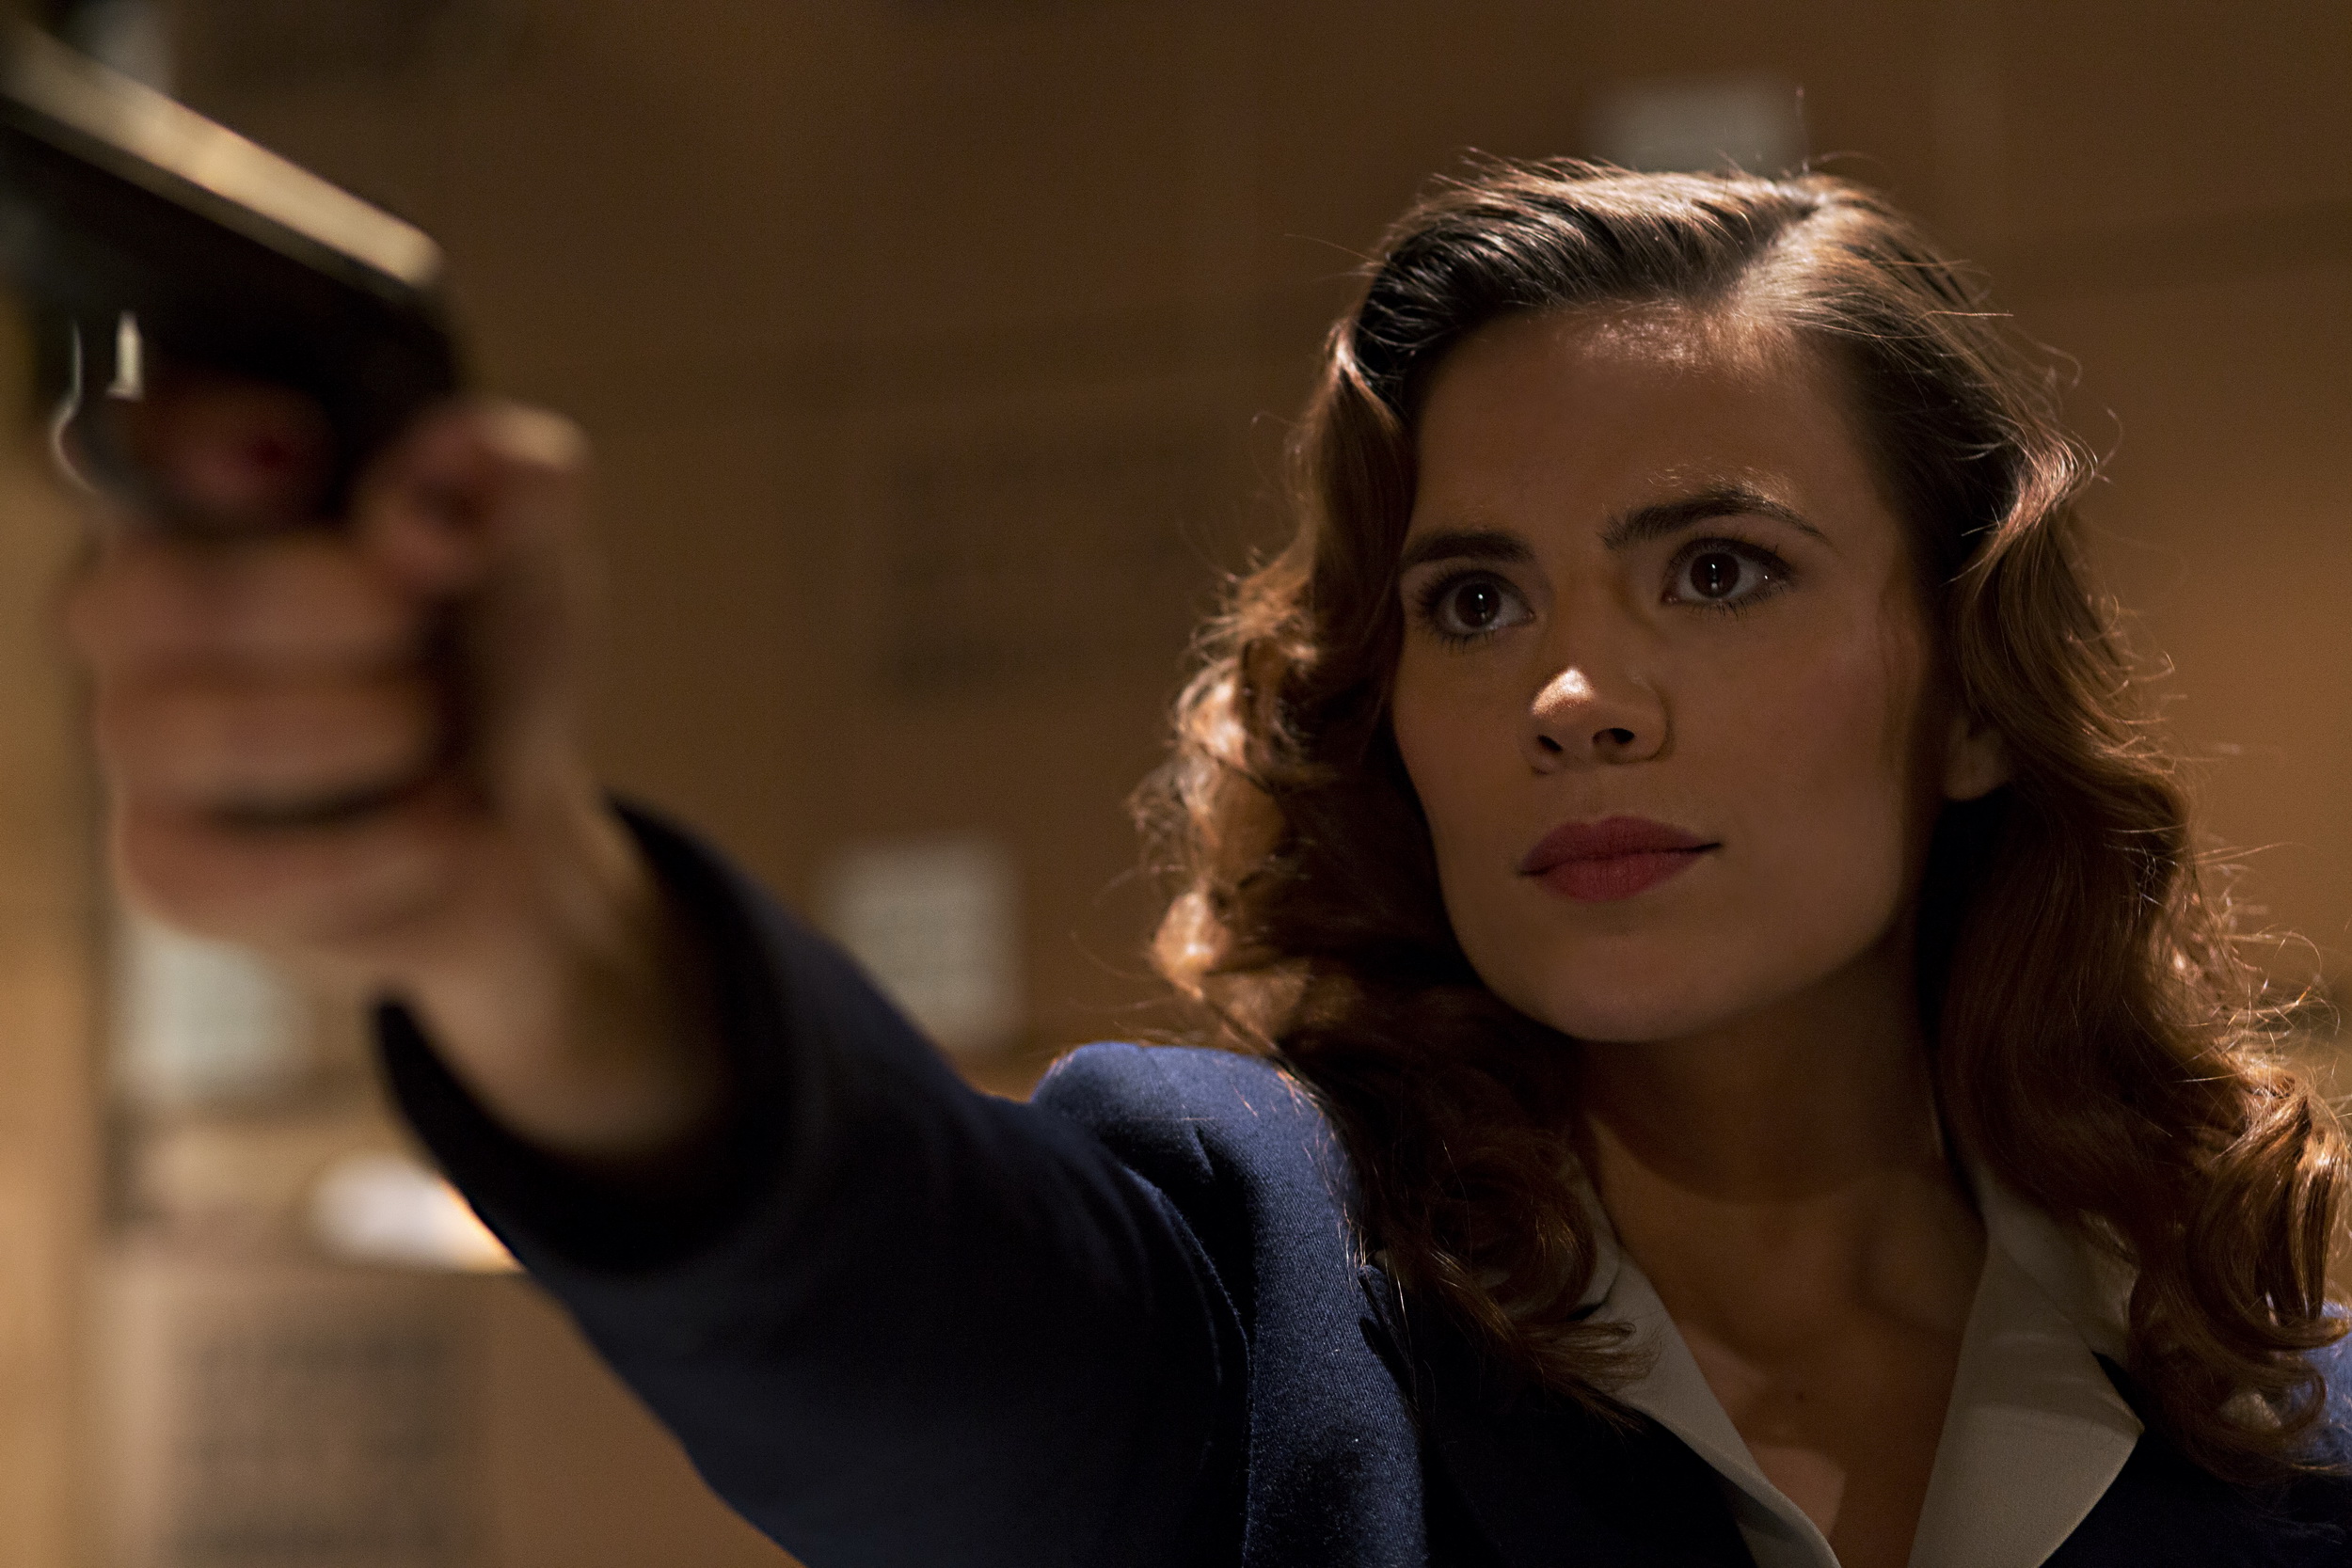 Reasons to get excited for ‘agent carter’